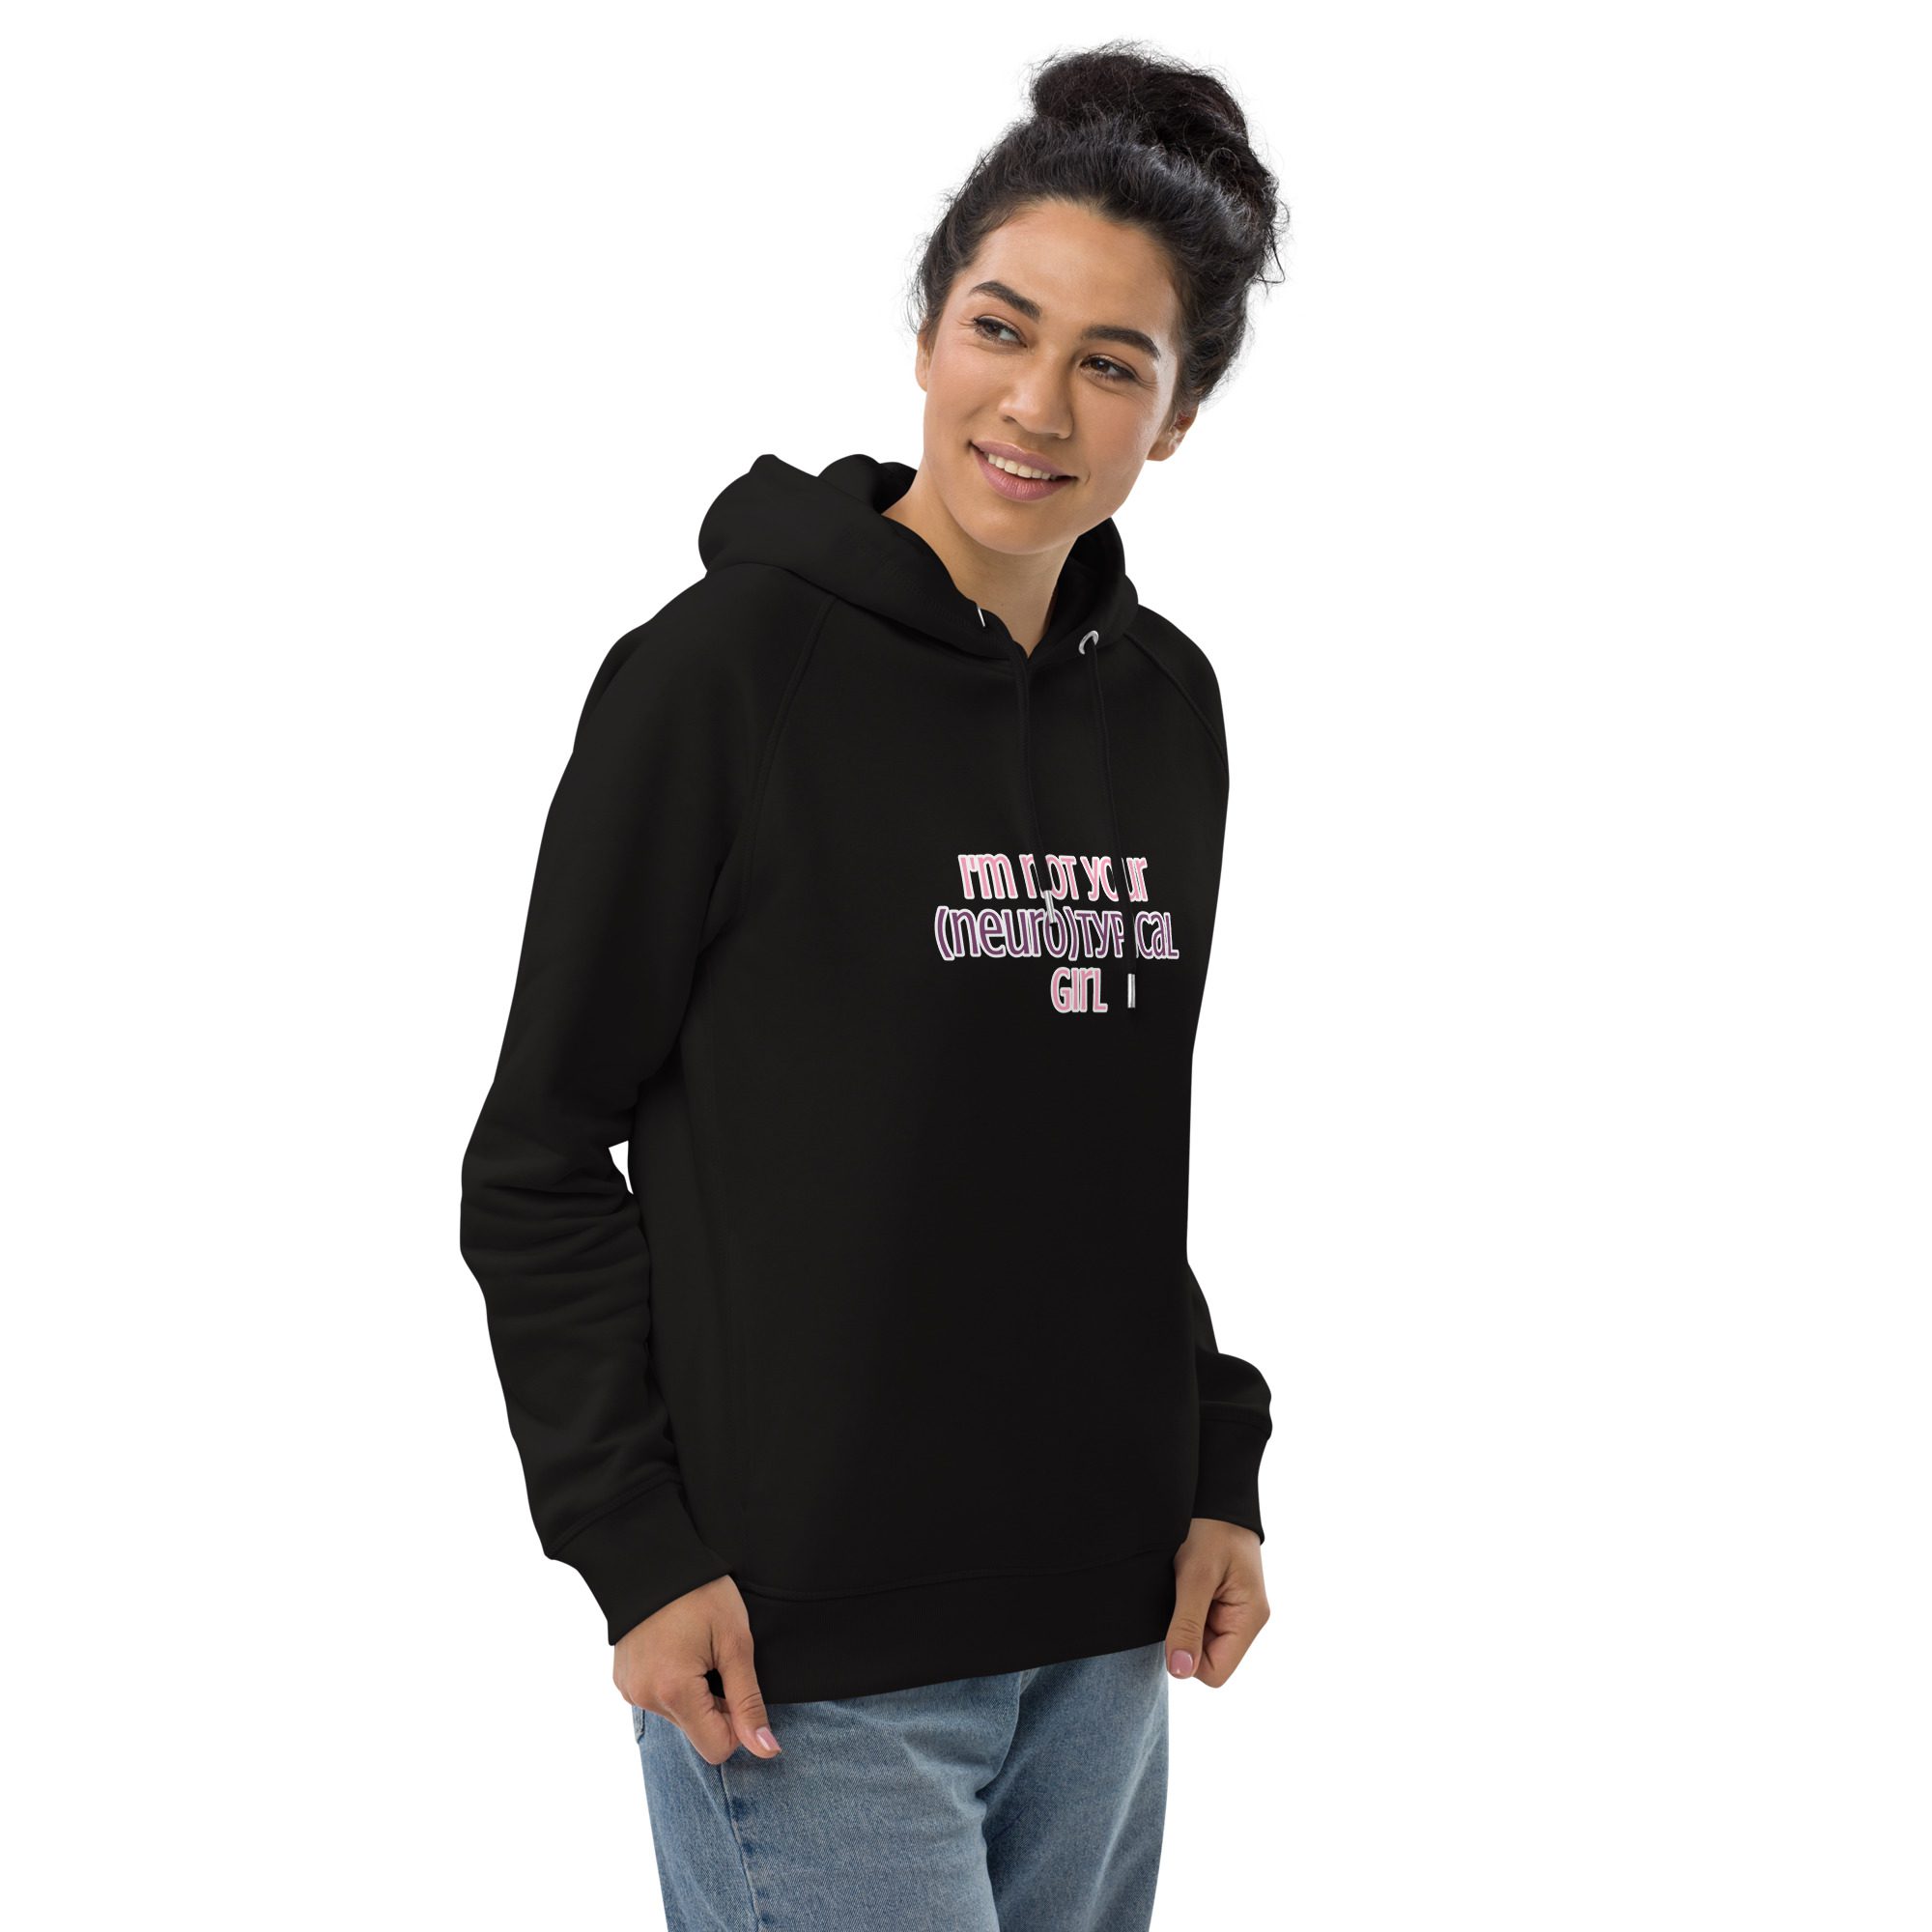 I’m Not Your Neurotypical Girl Organic Hoodie